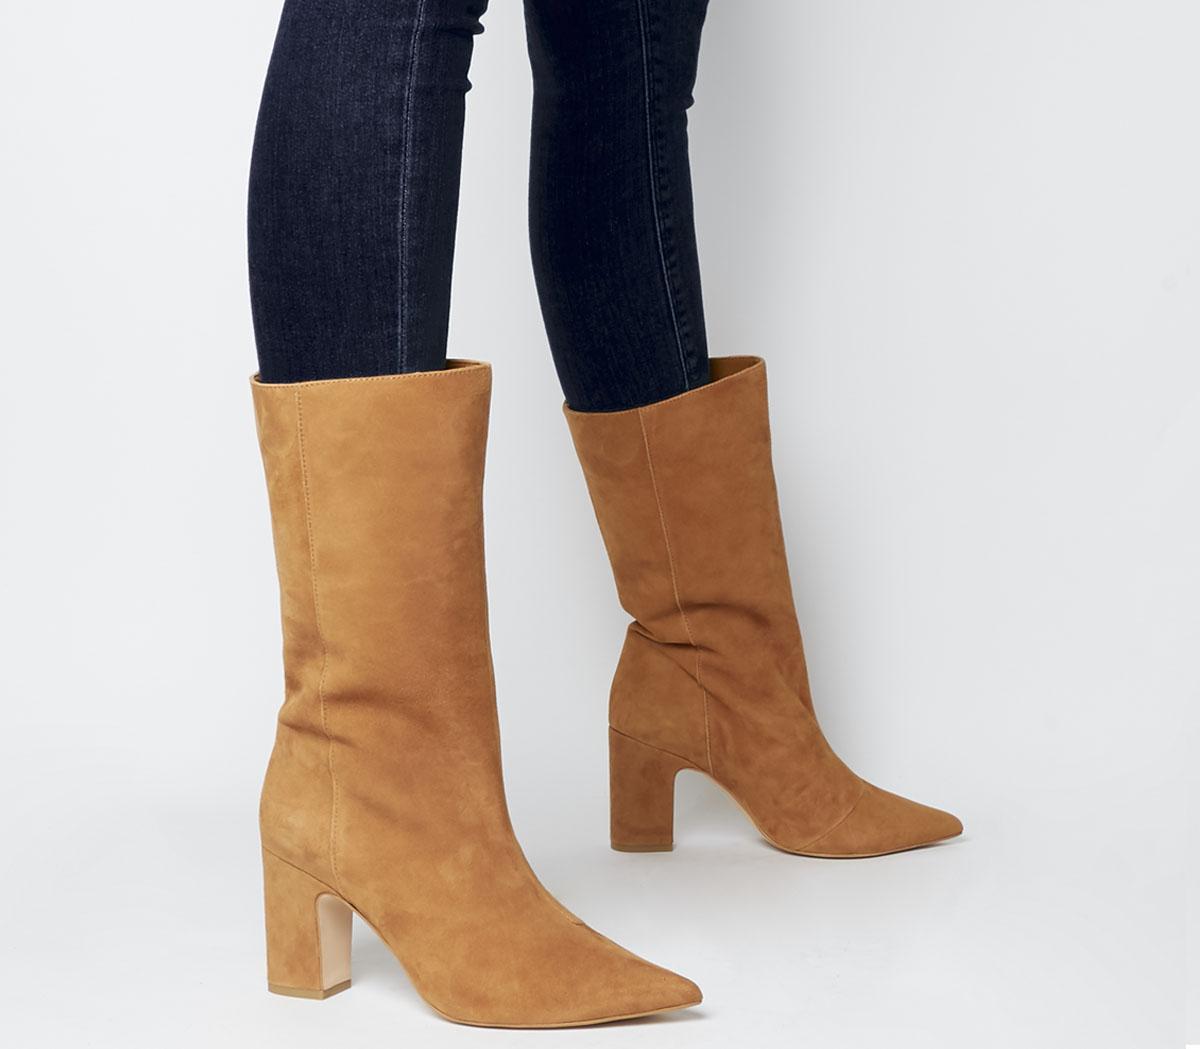 suede calf high boots